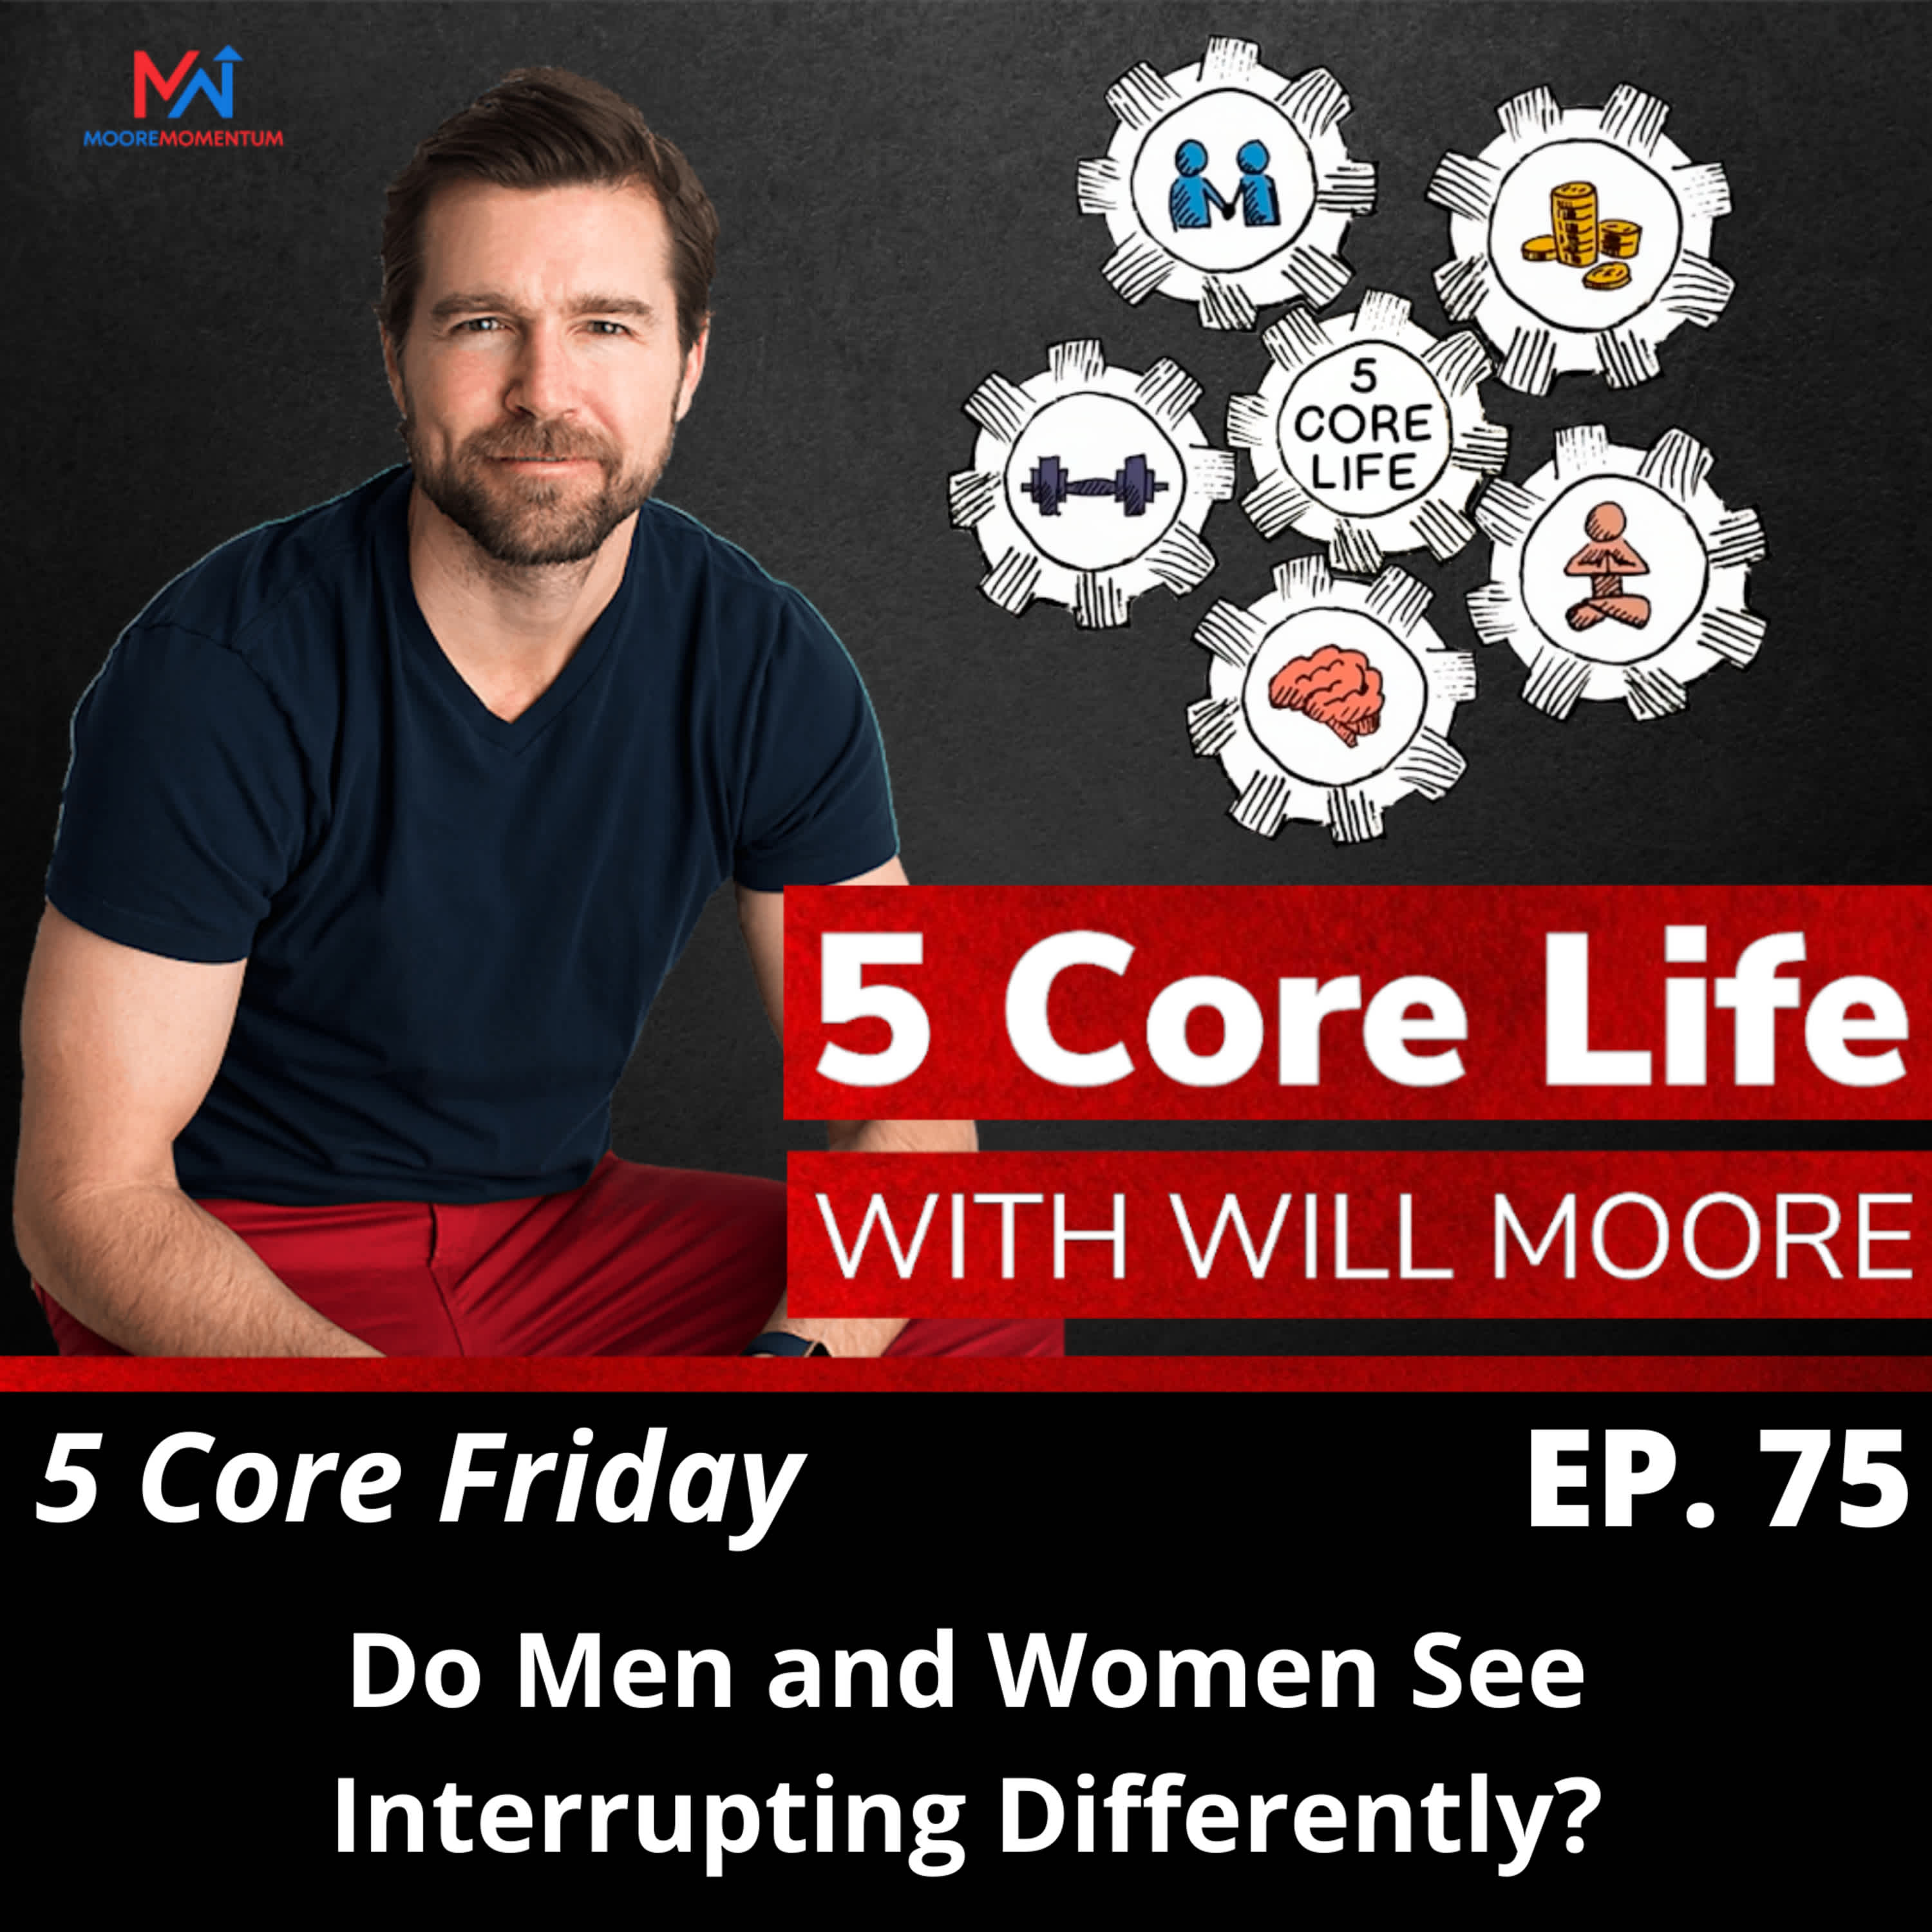 Do Men and Women See Interrupting Differently: 5 Core Friday